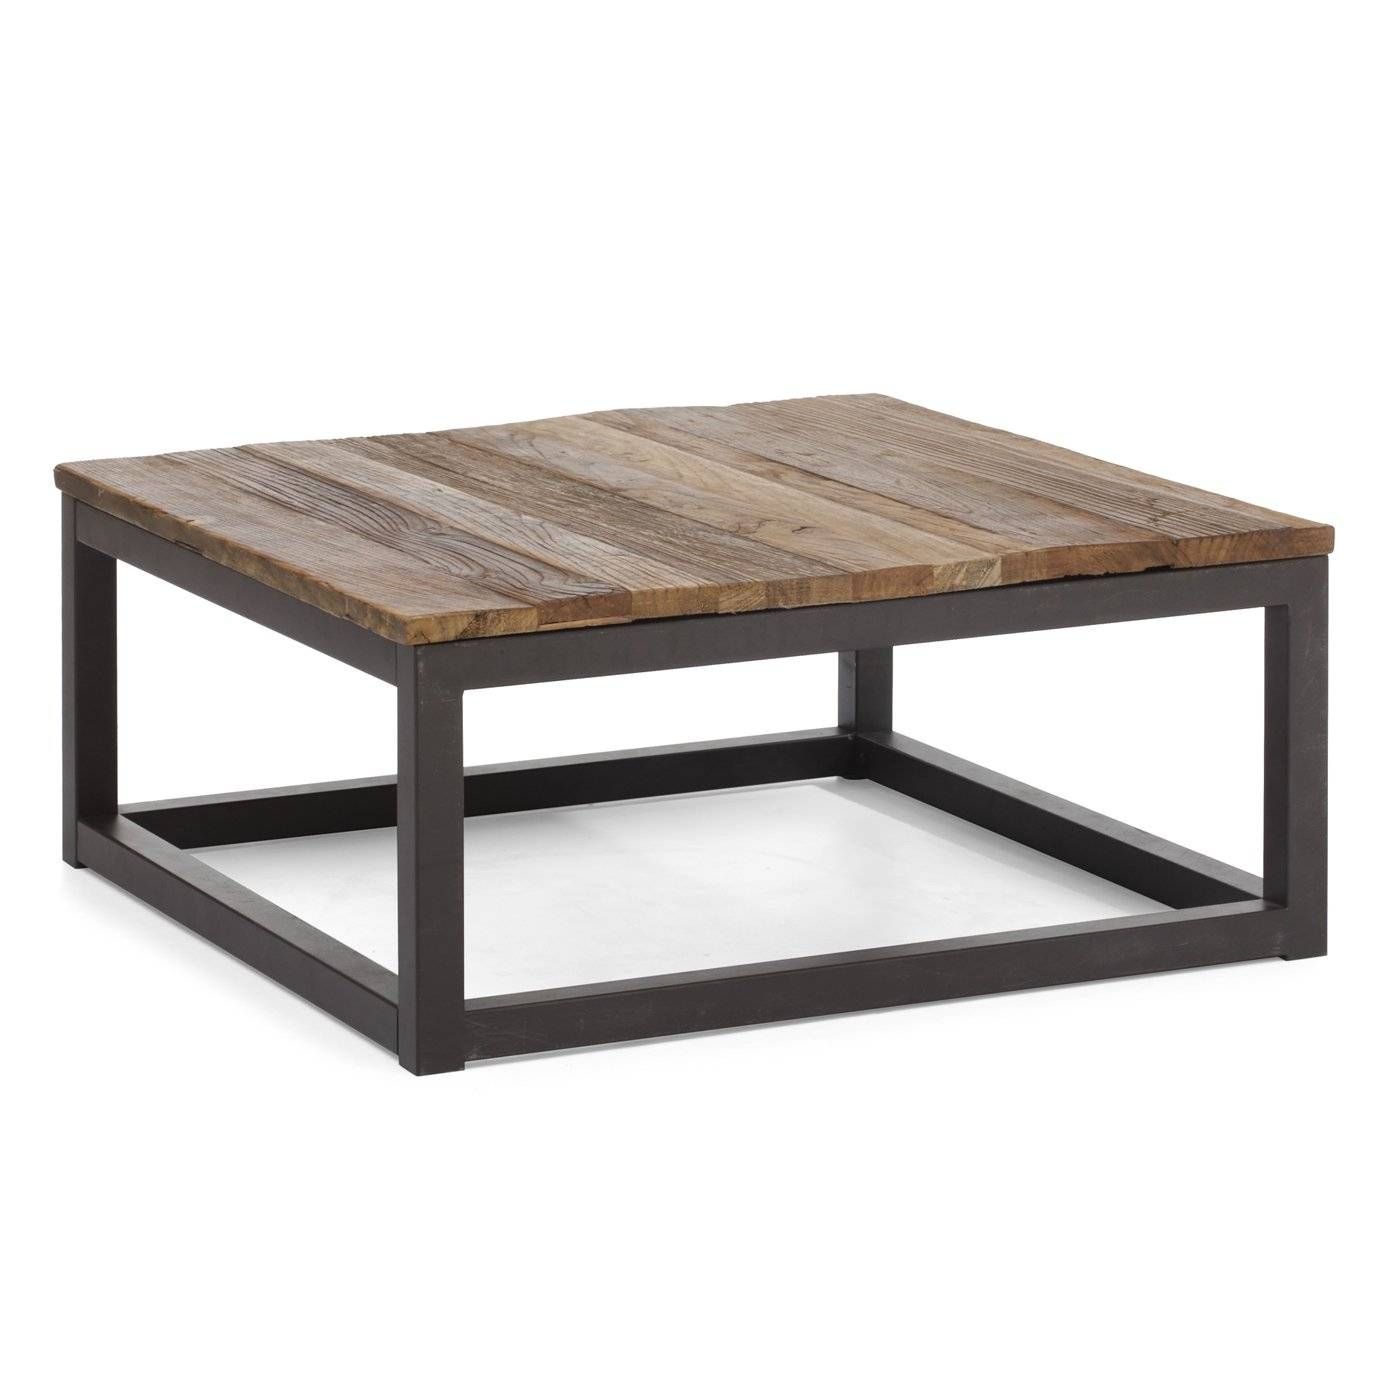 Coffee Tables: Charming Square Coffee Tables Ideas 48" Square With Regard To Square Coffee Tables (View 14 of 30)